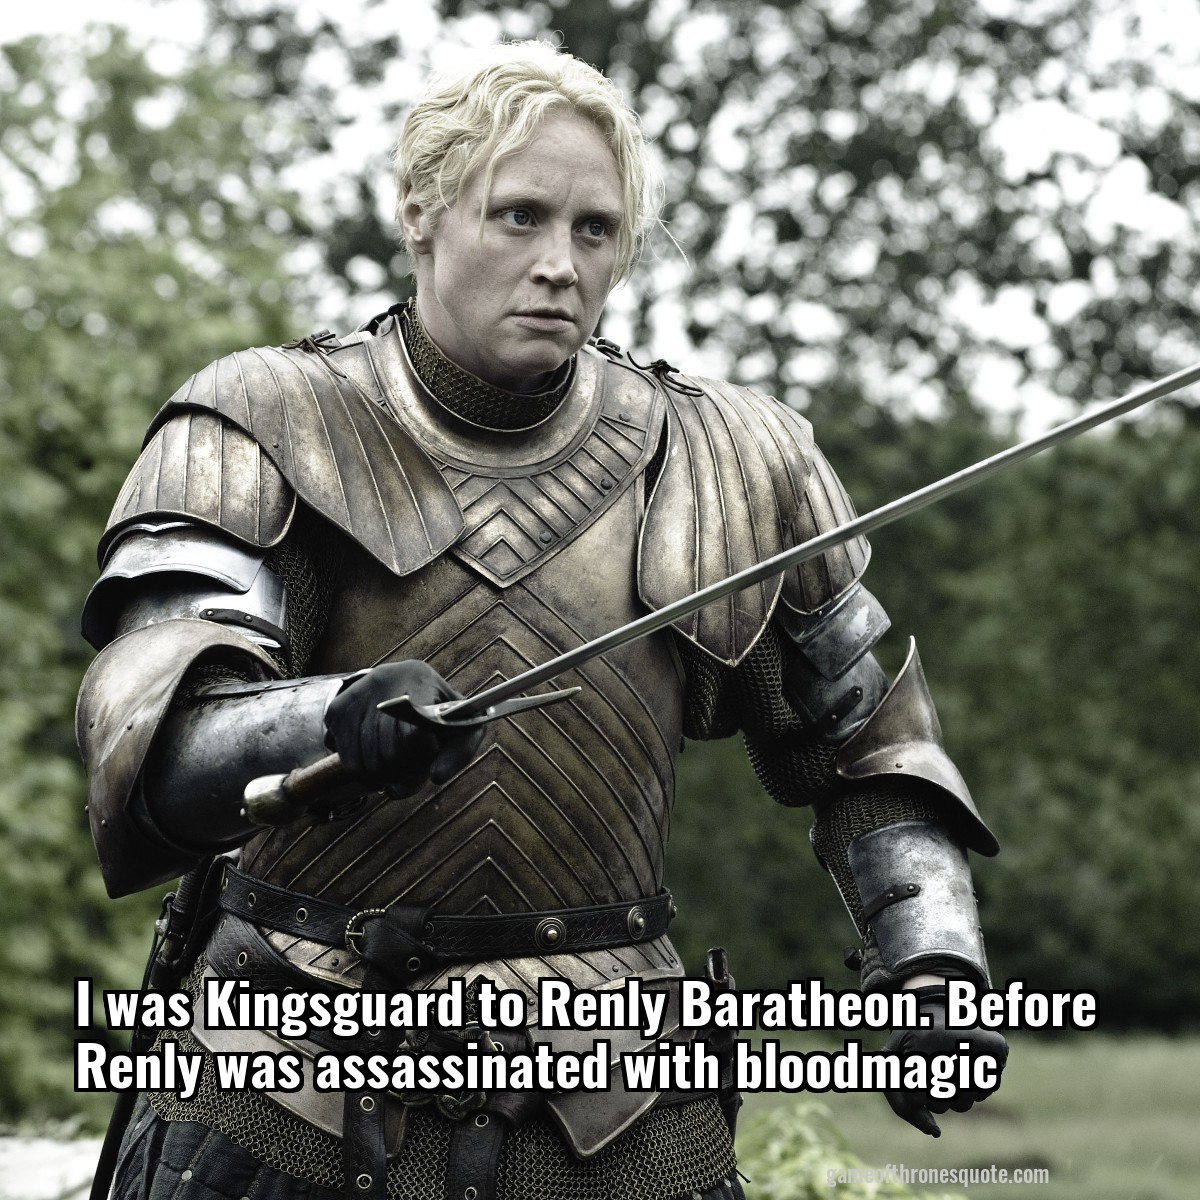 I was Kingsguard to Renly Baratheon. Before Renly was assassinated with bloodmagic